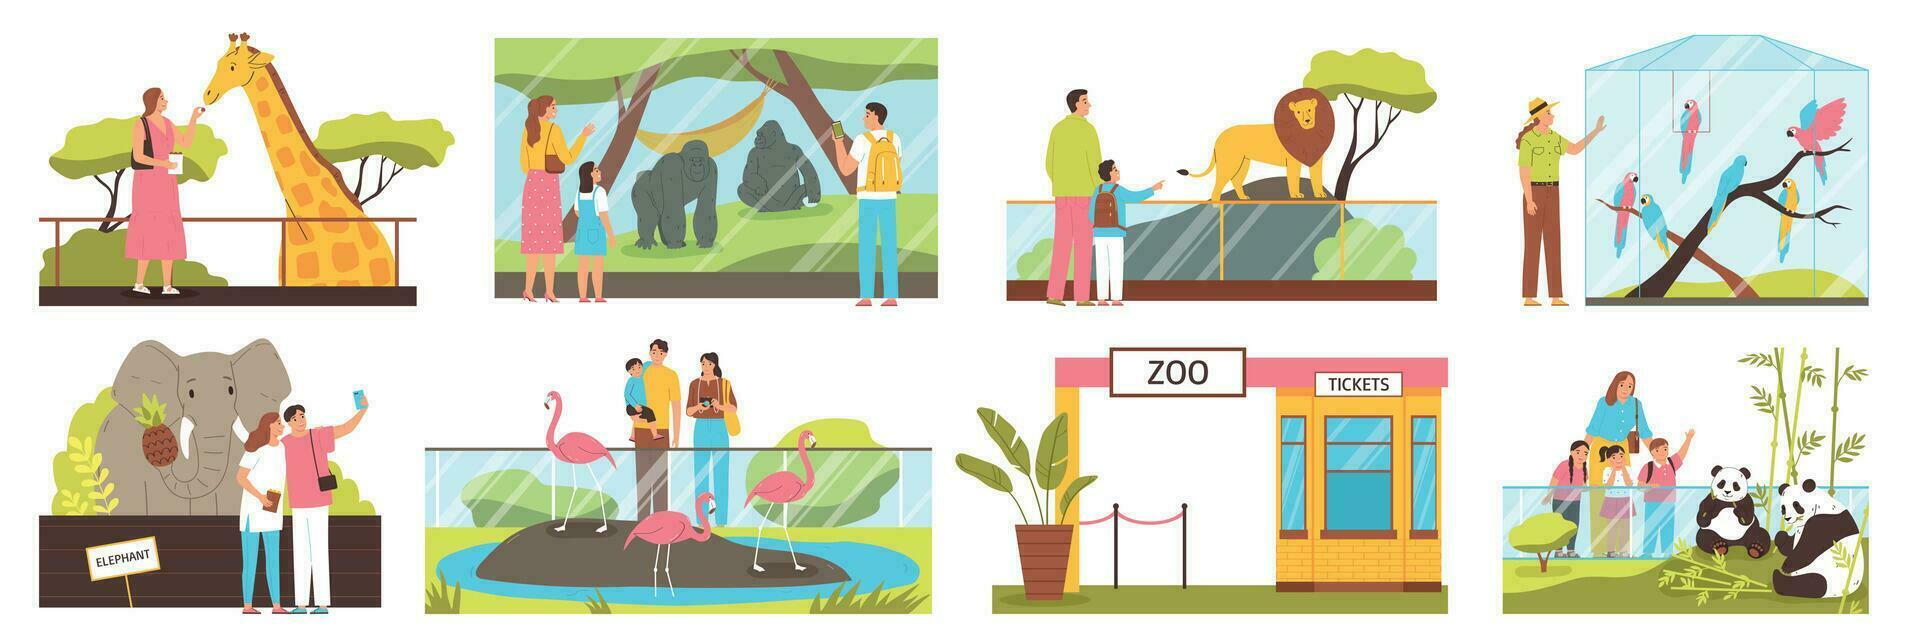 Zoo Compositions Set vector